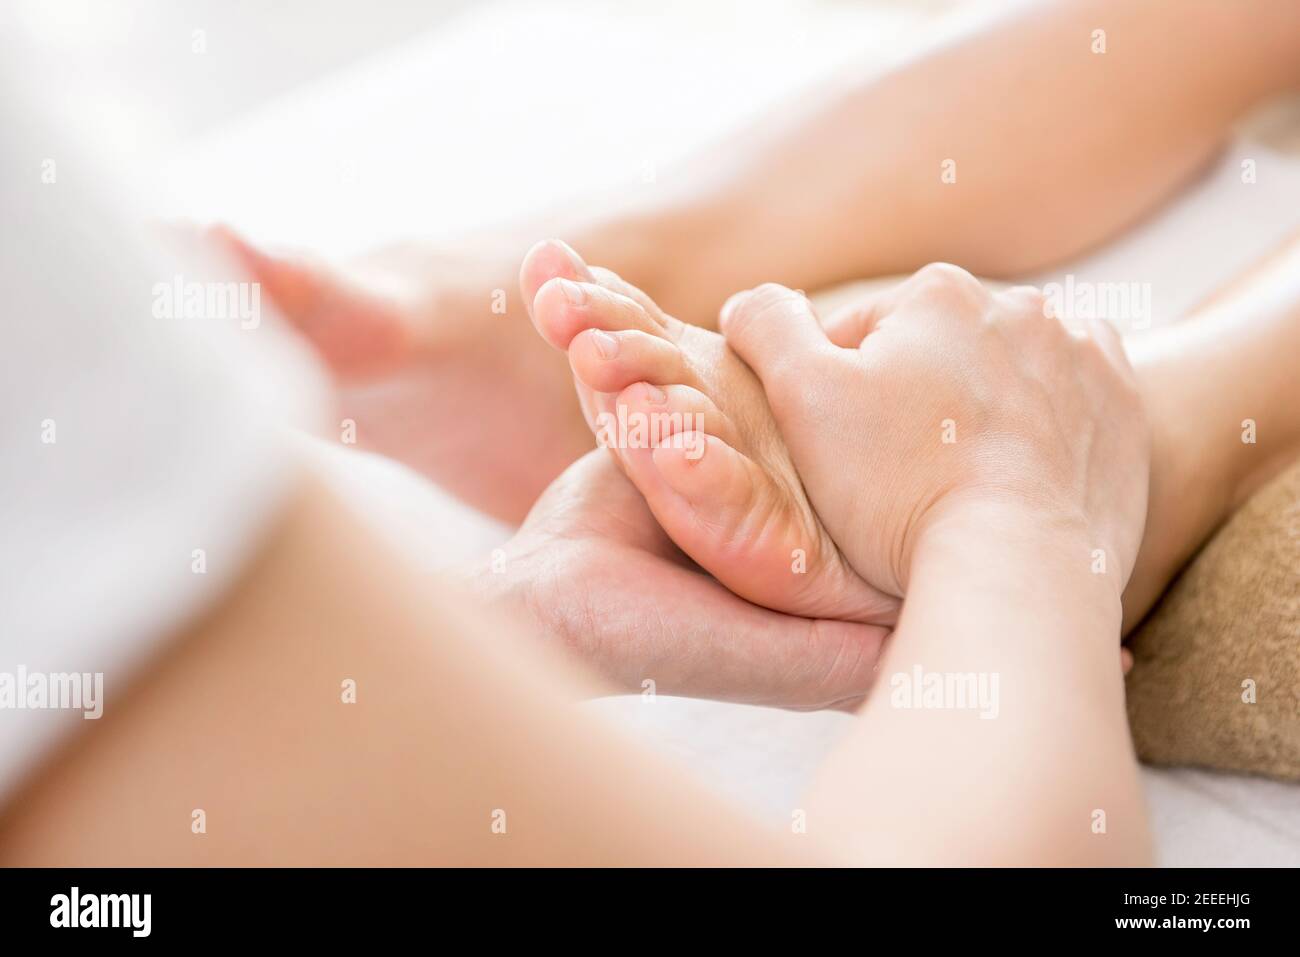 Professional therapist giving relaxing reflexology foot massage to a woman in spa Stock Photo